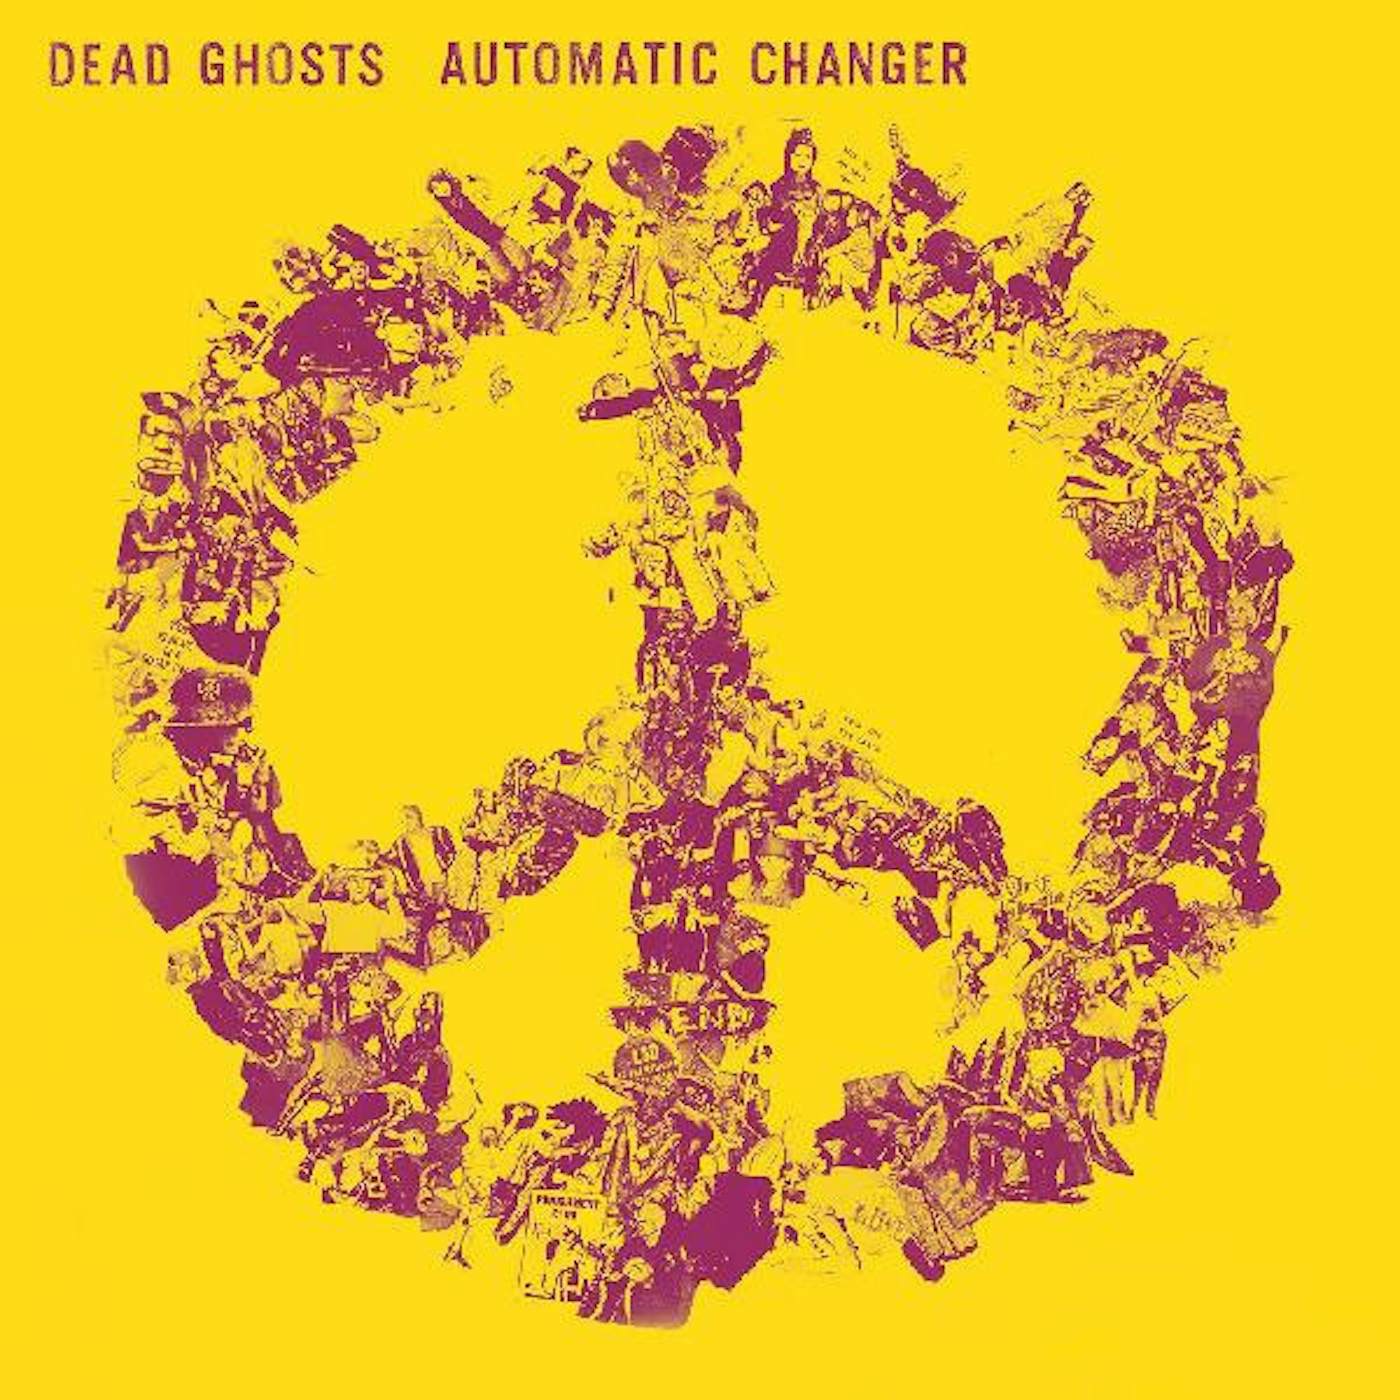 Dead Ghosts Automatic Changer Vinyl Record